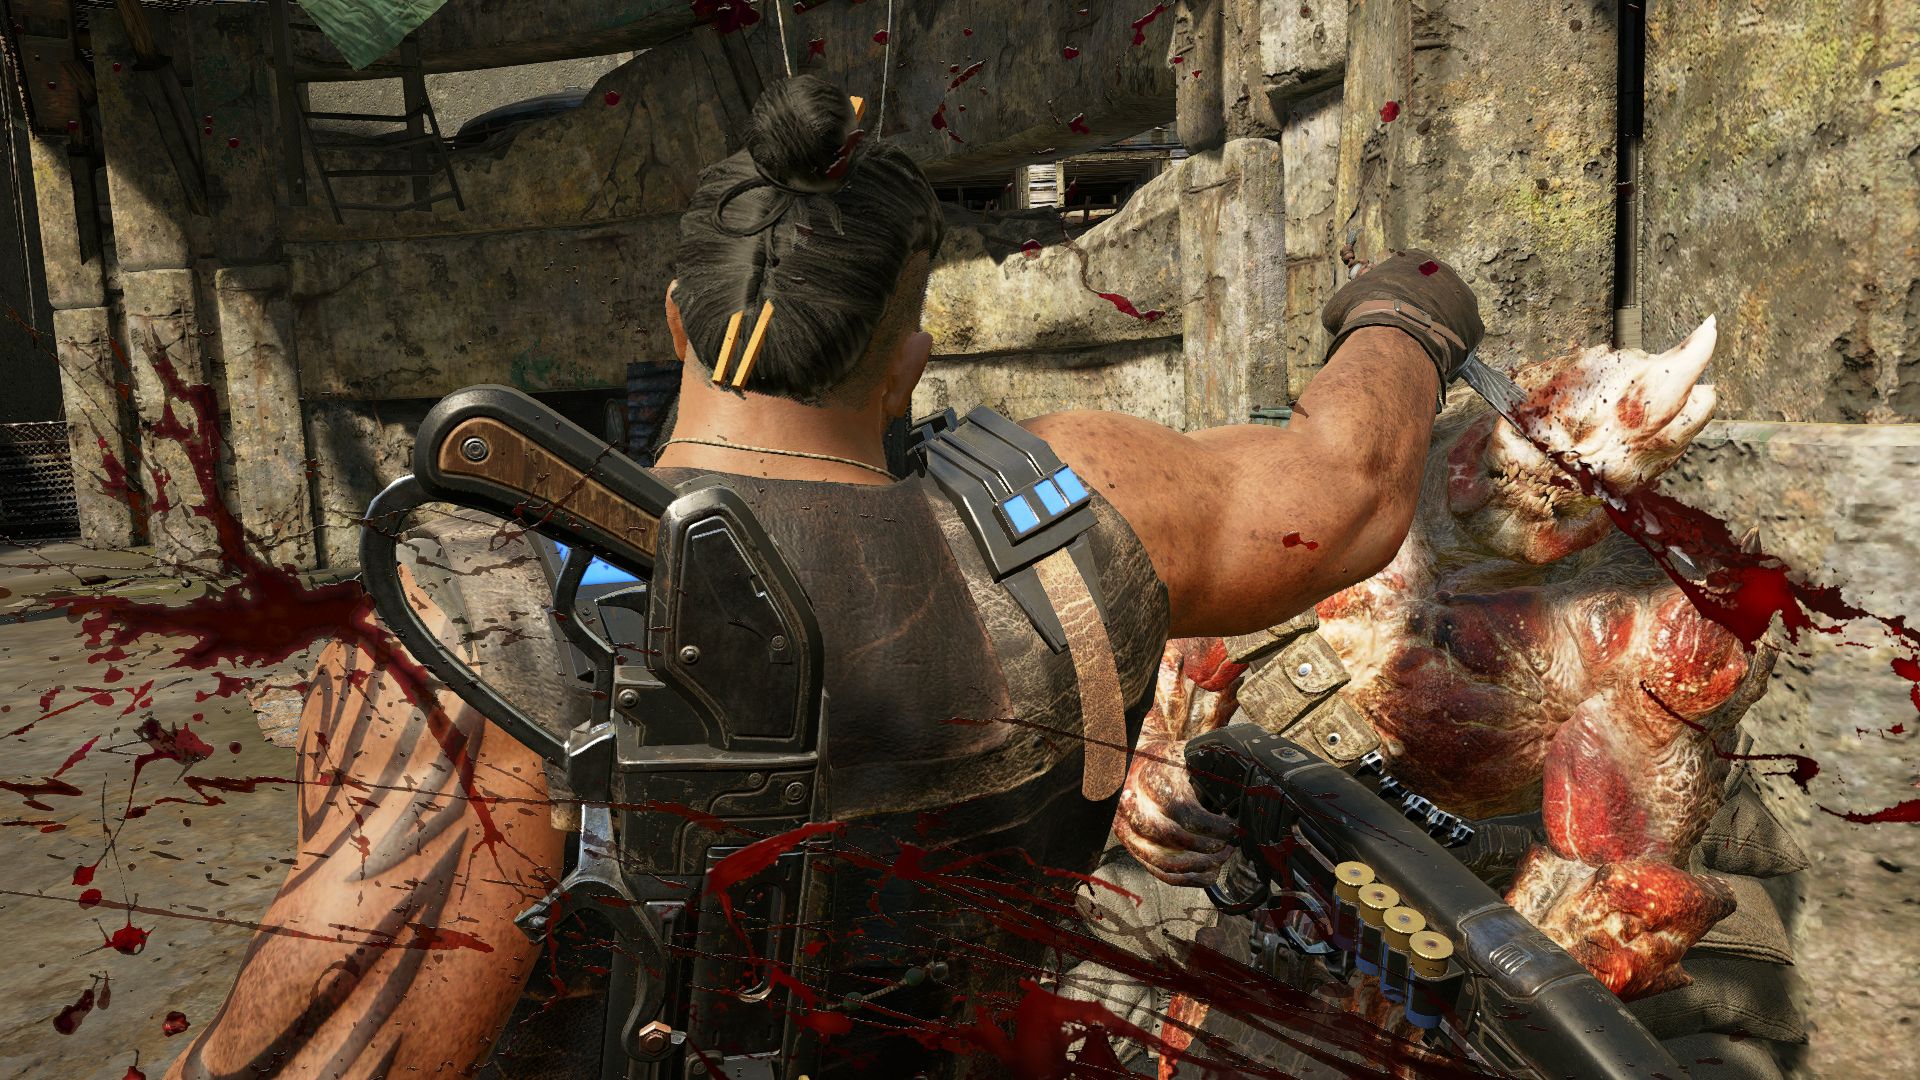 gears of war 4 multiplayer preview image 4